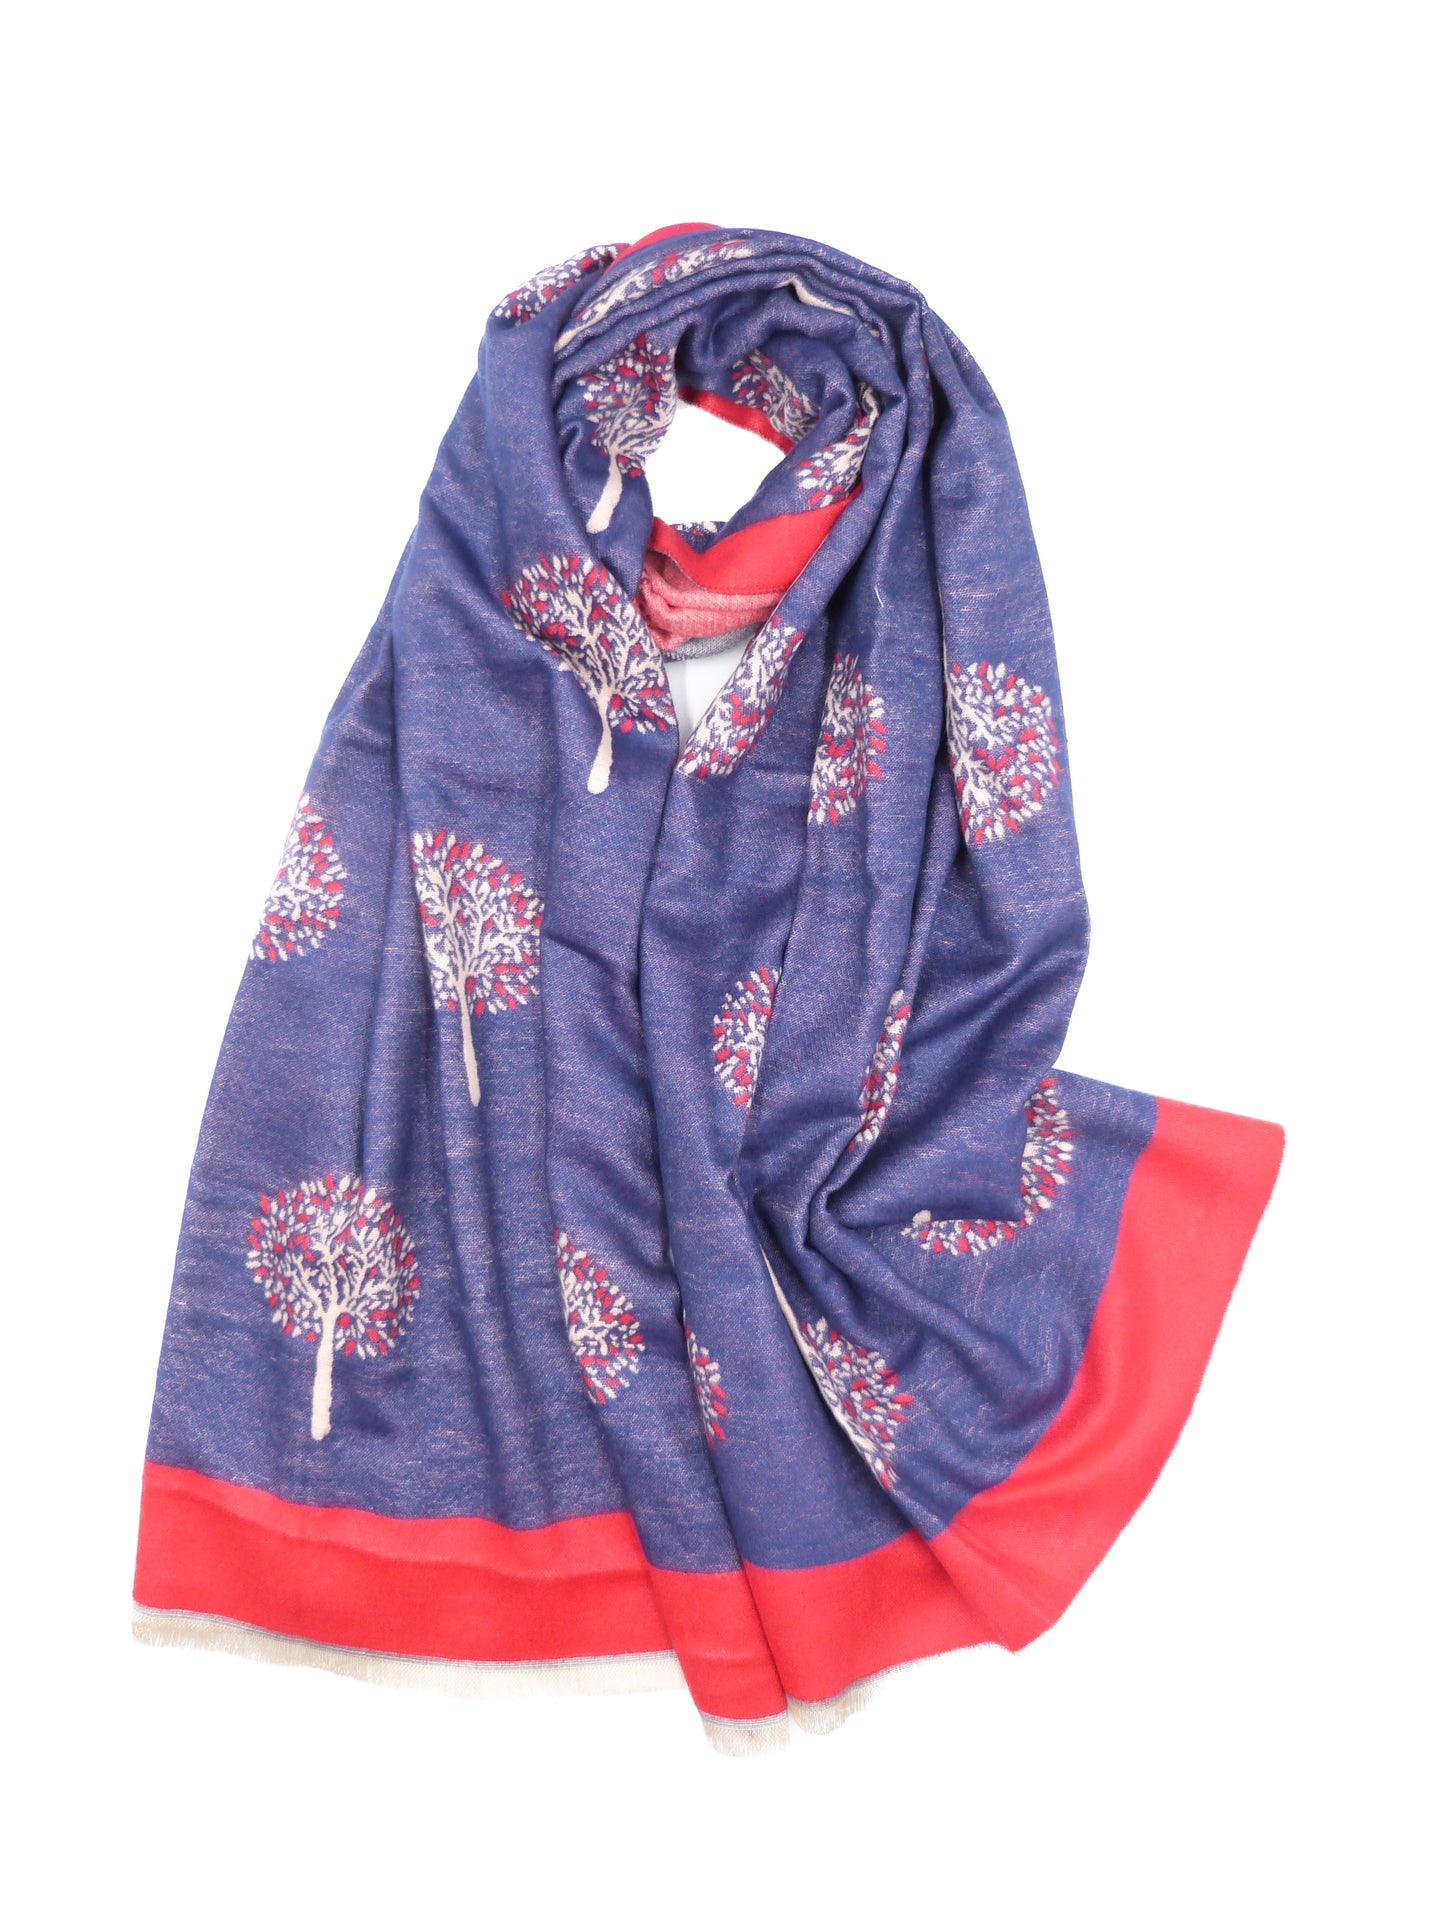 Tree Of Life Reversible Printed Winter Scarf Cashmere Feel